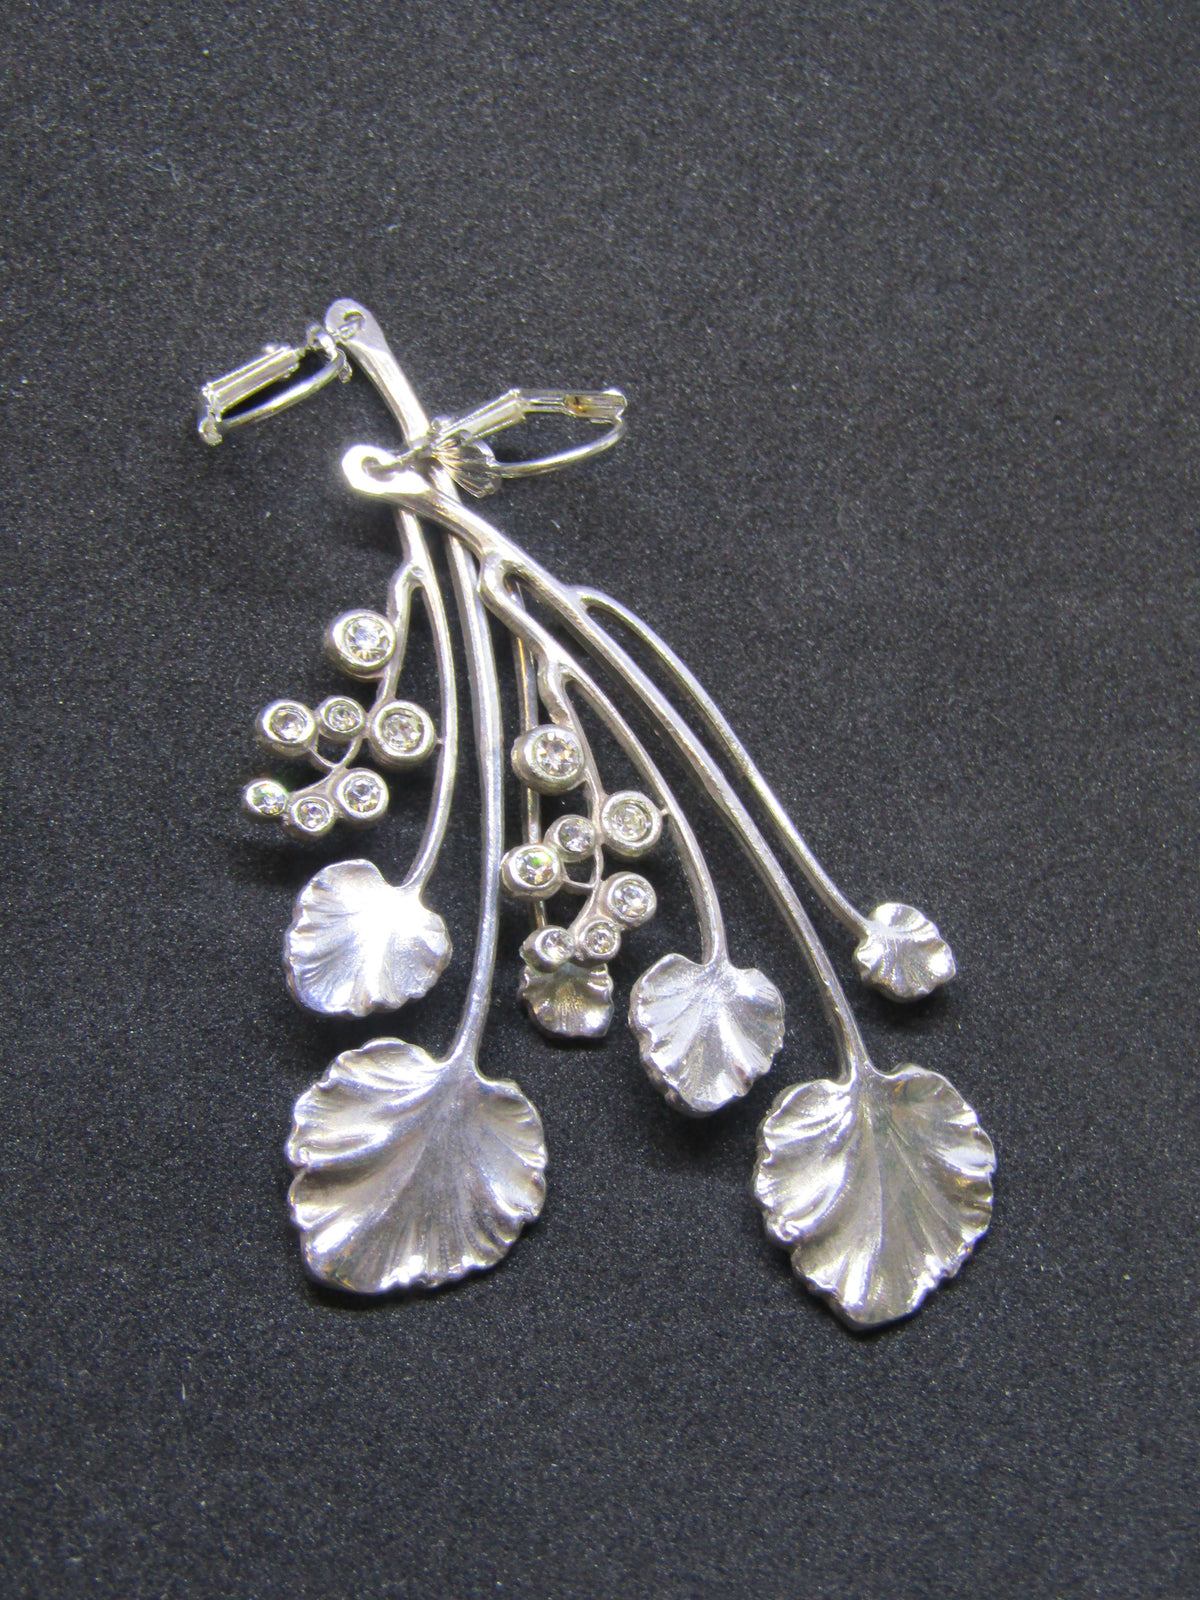 Leaf Design with Diamante Sparkle Earrings by Jess Lelong